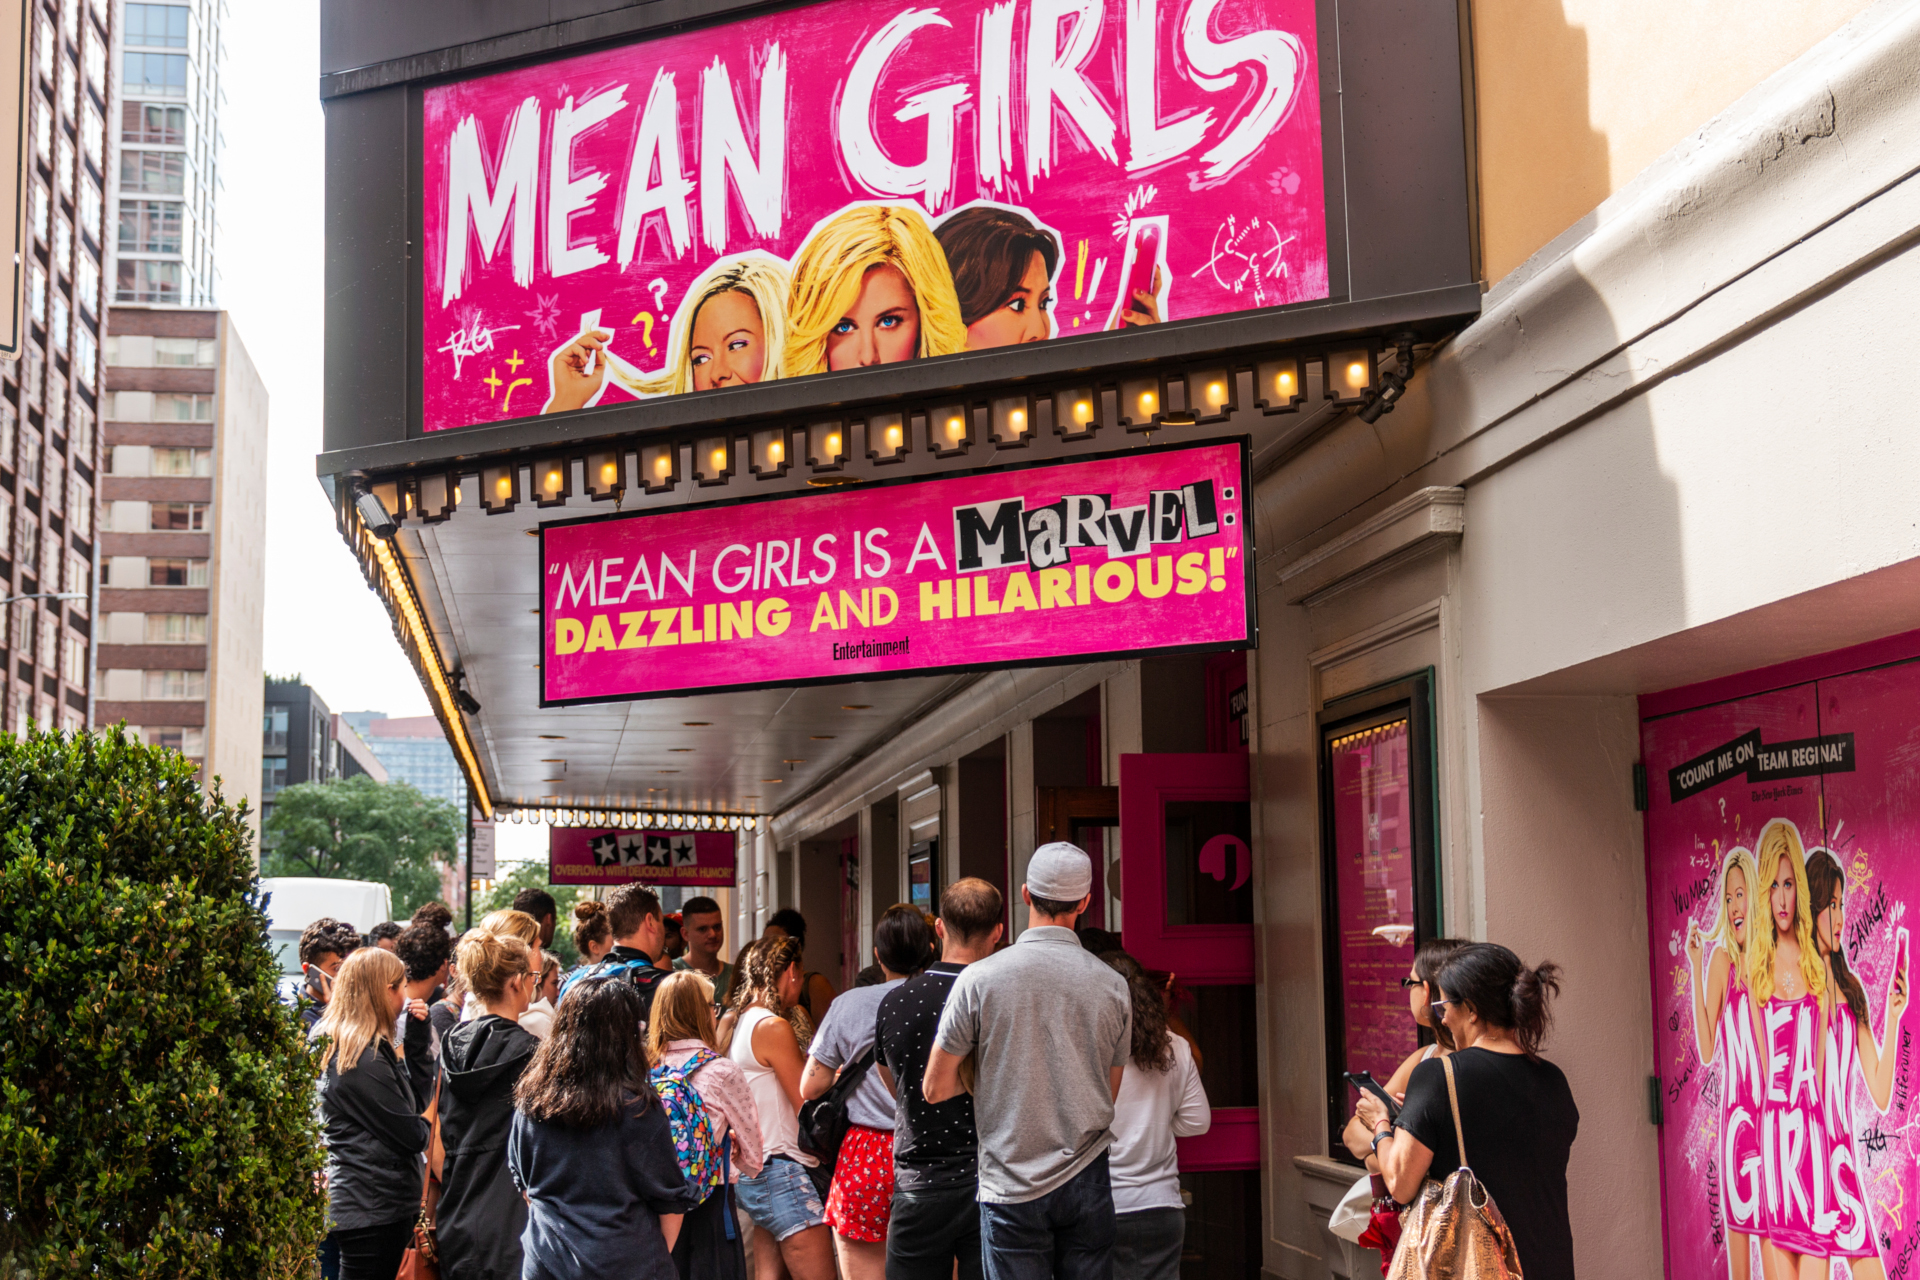 The New Mean Girls Movie: Where Was It Filmed?